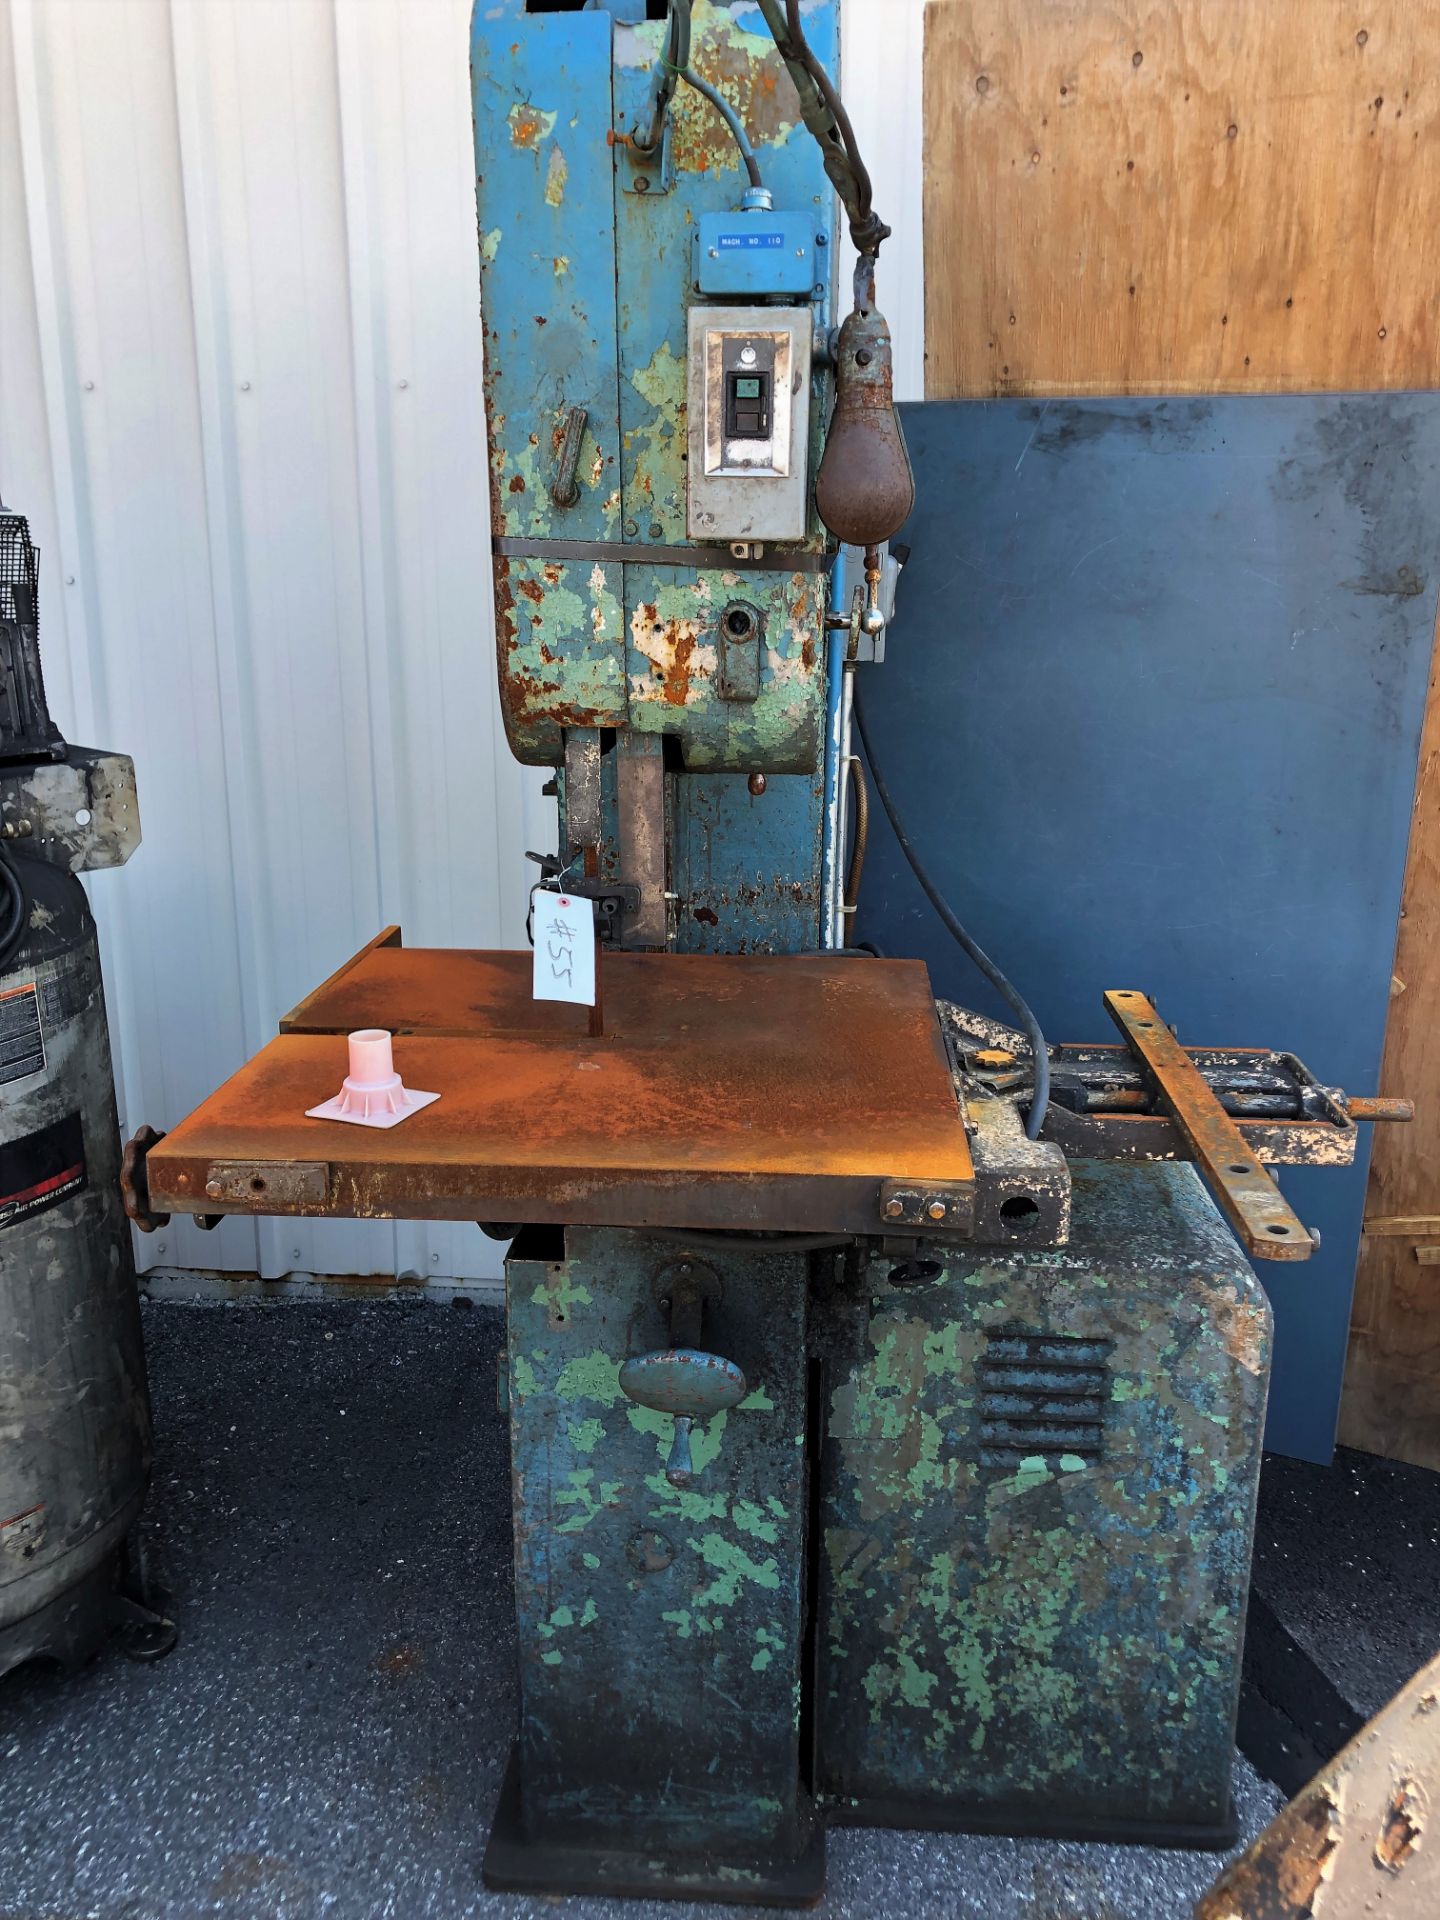 26" Doall Contouring Vertical Band Saw - Image 3 of 7